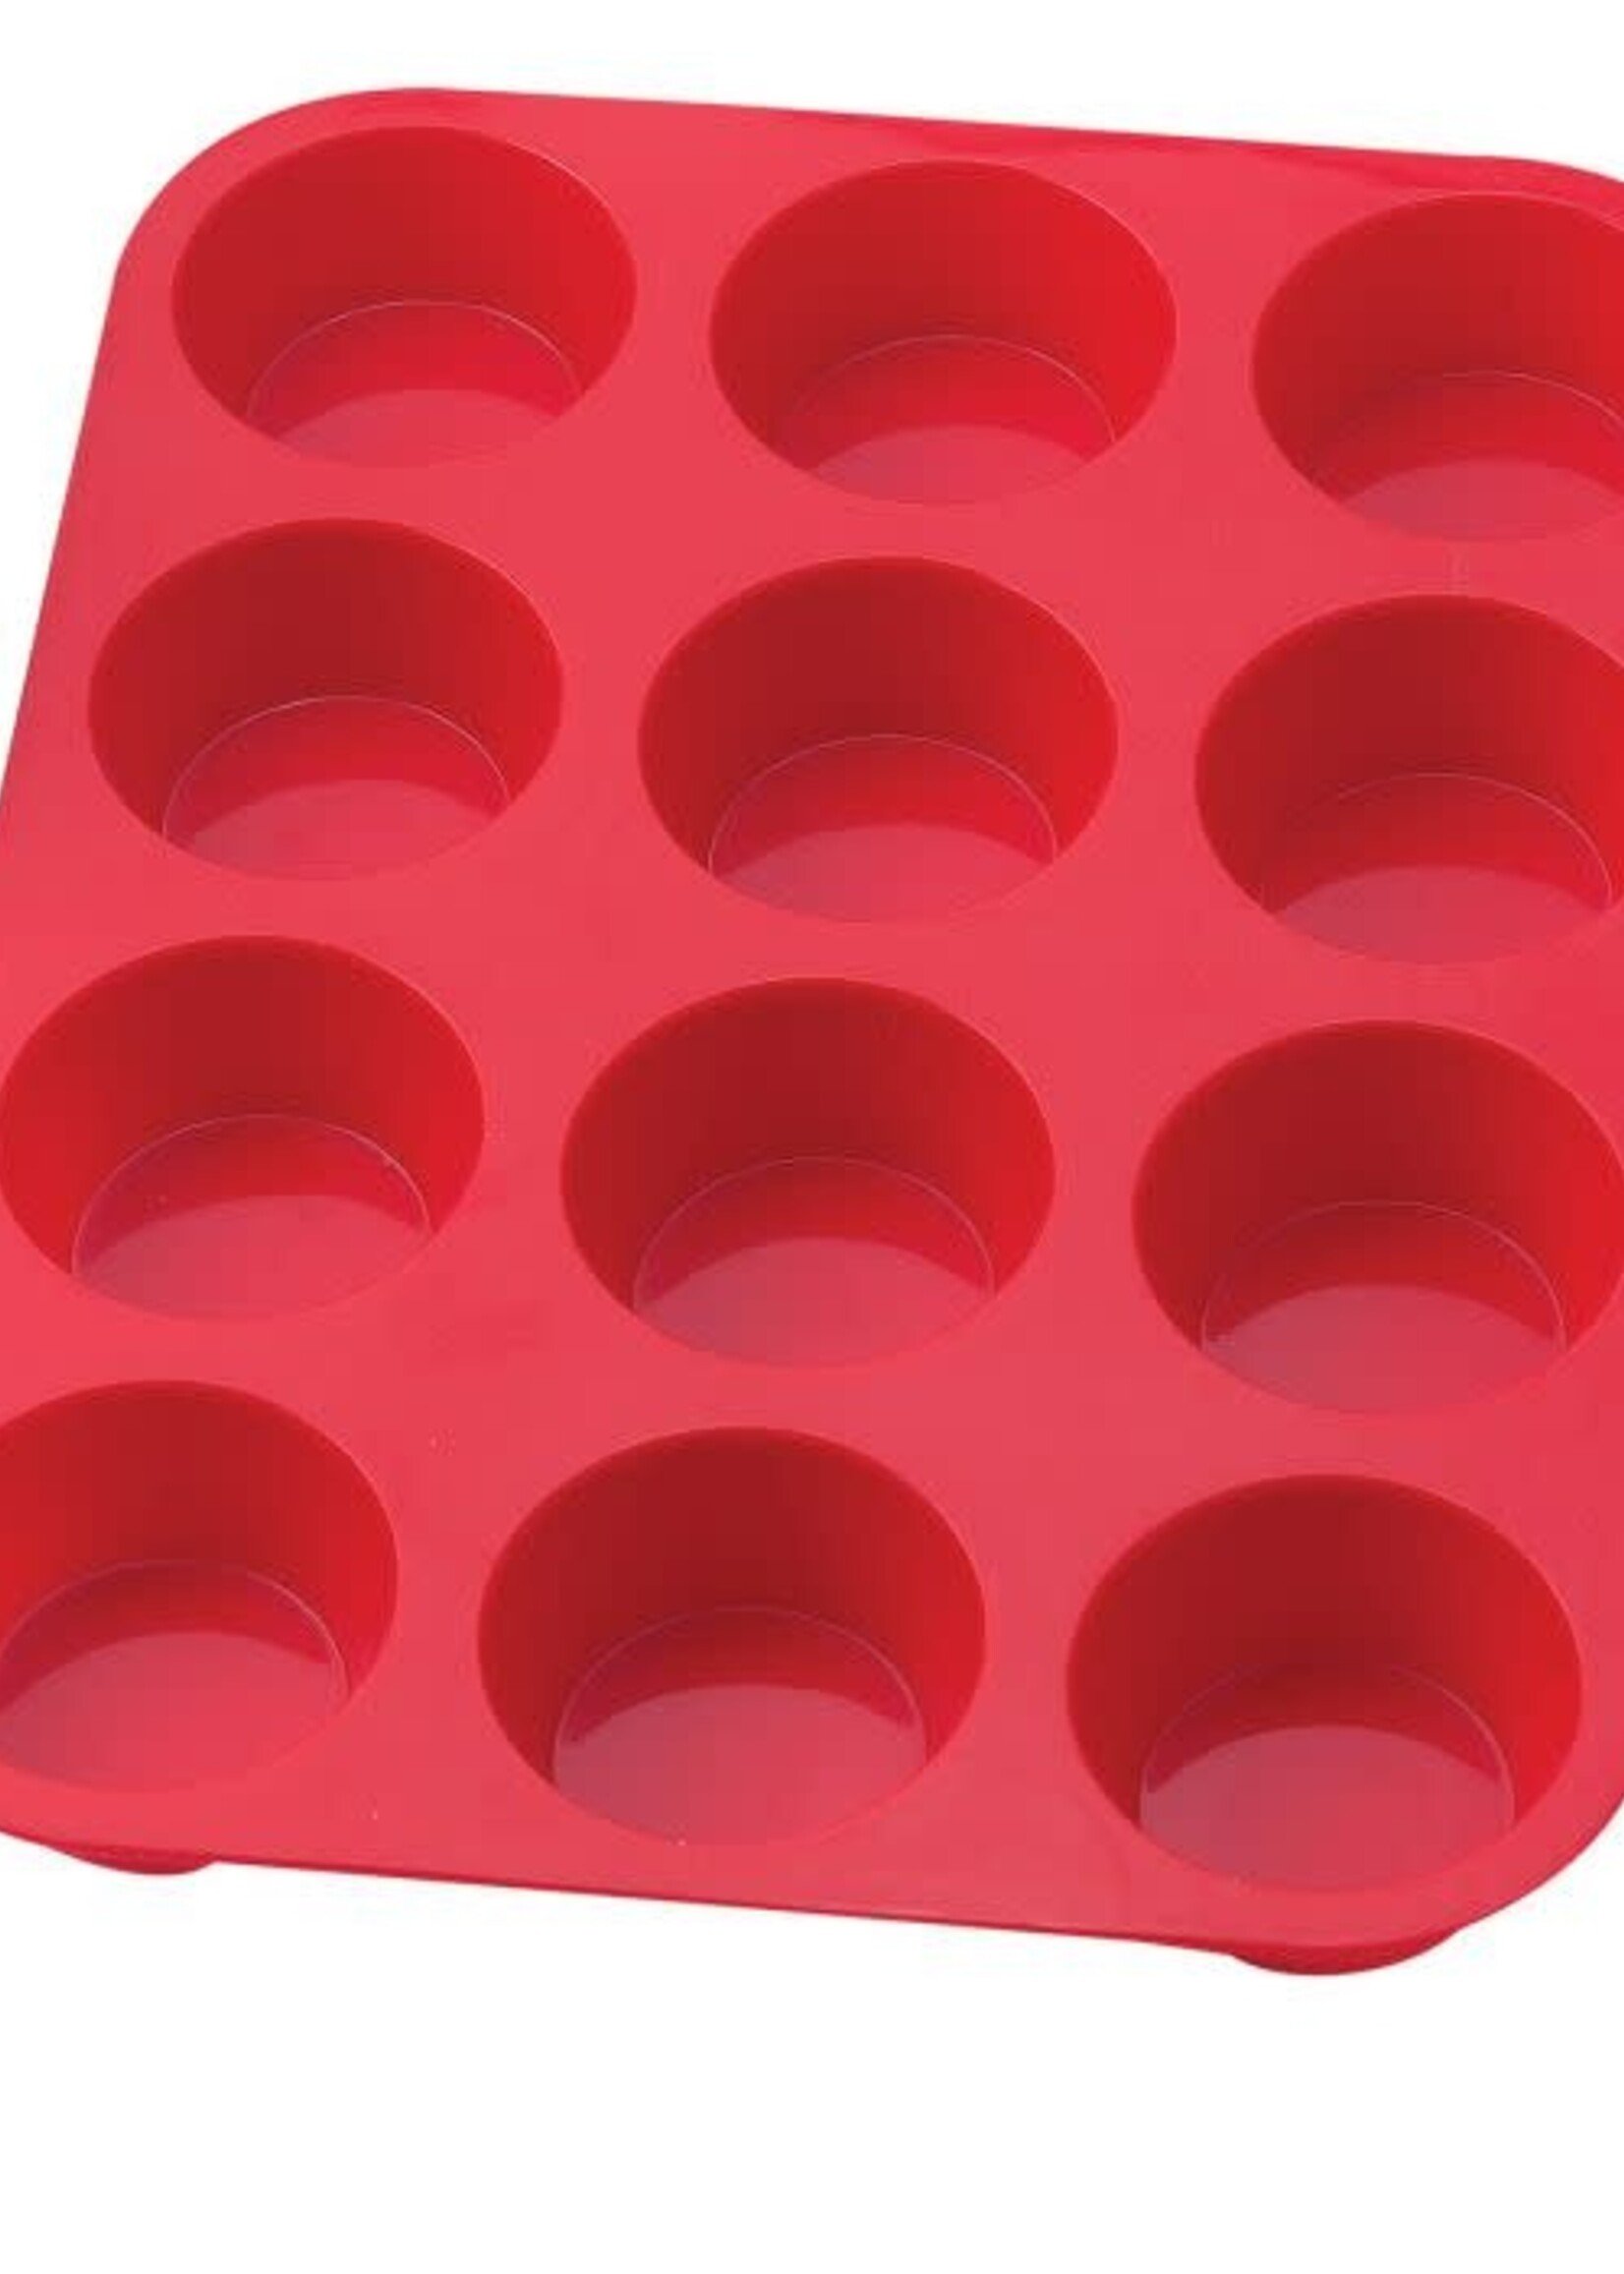 Mrs. Anderson’s Baking 12c Silicone Muffin Pan